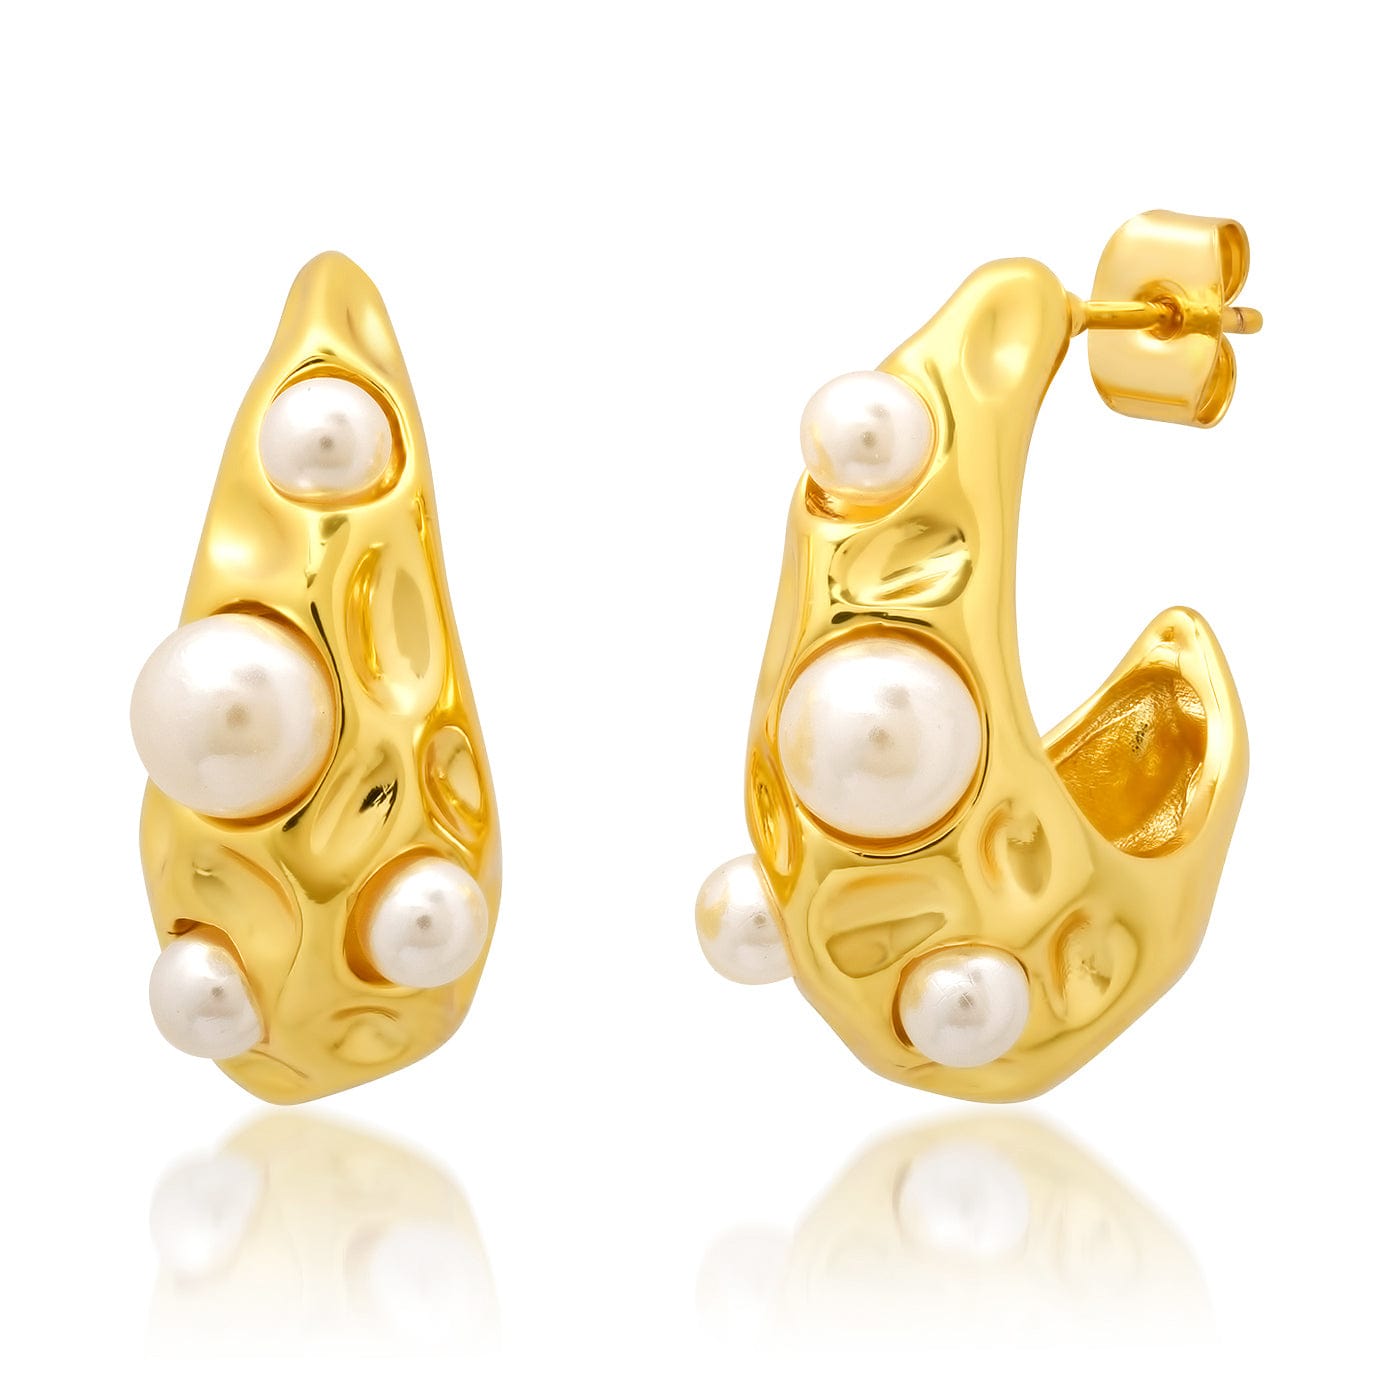 TAI JEWELRY Earrings Abstract Teardrop Earrings with Scattered Pearls